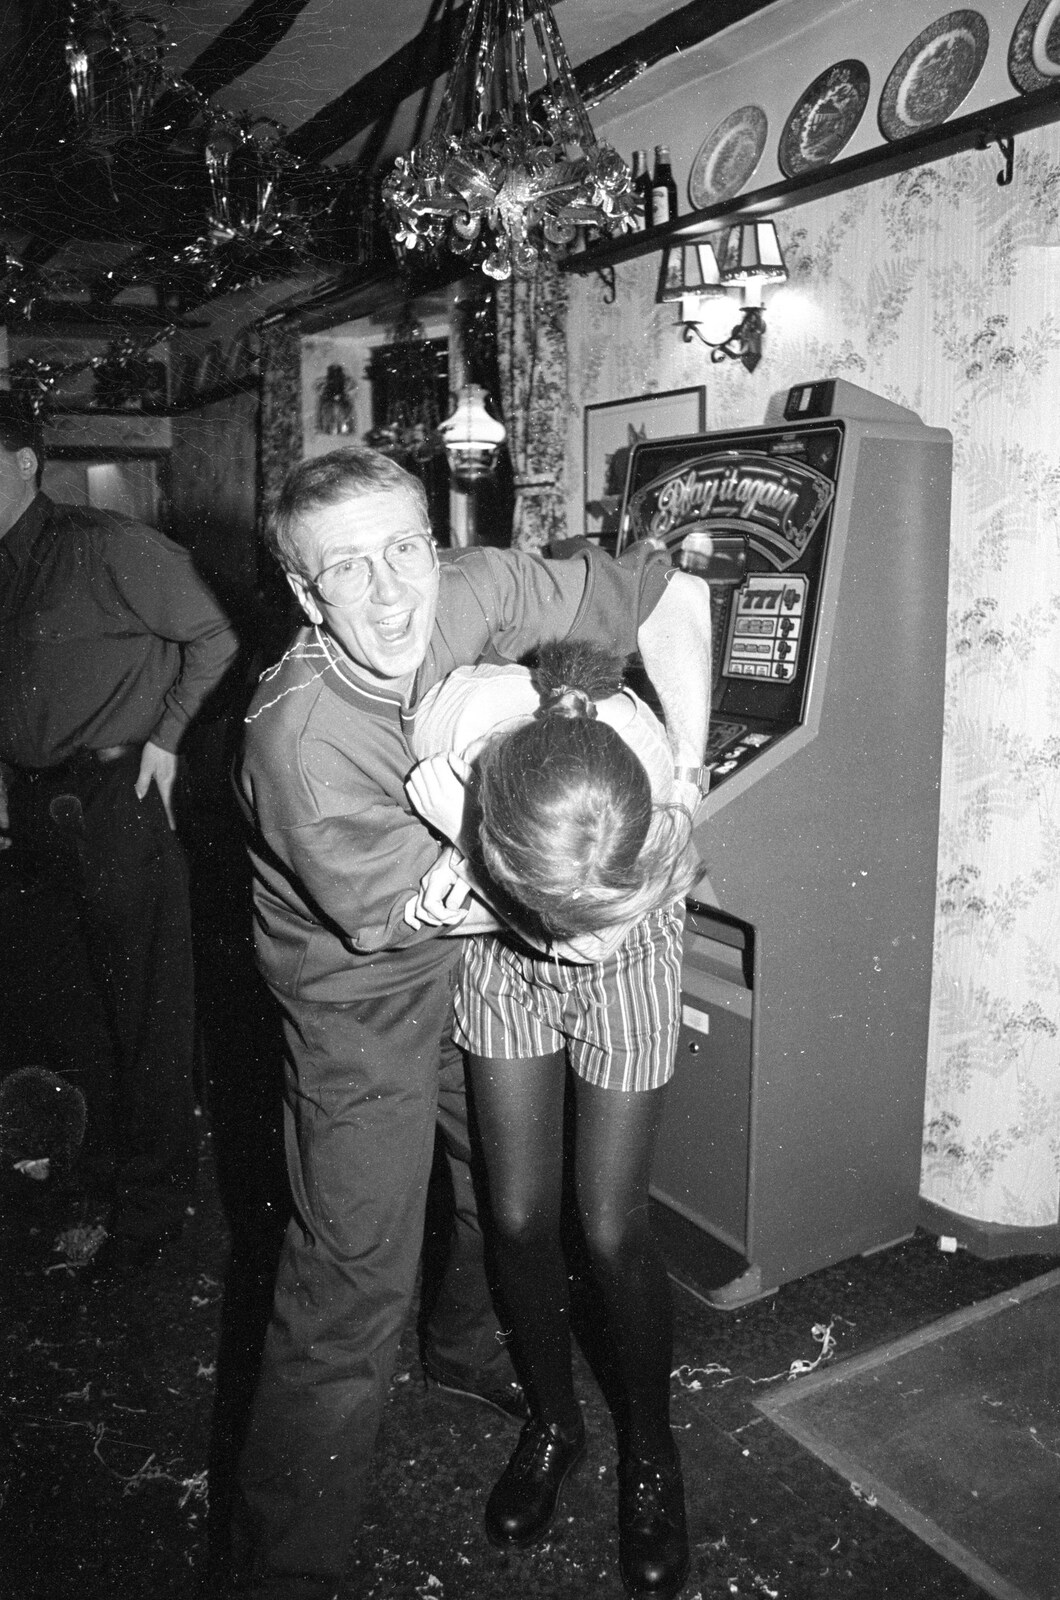 John Willy has a wrestle with Lorraine from New Year's Eve at the Swan Inn, Brome, Suffolk - 31st December 1992